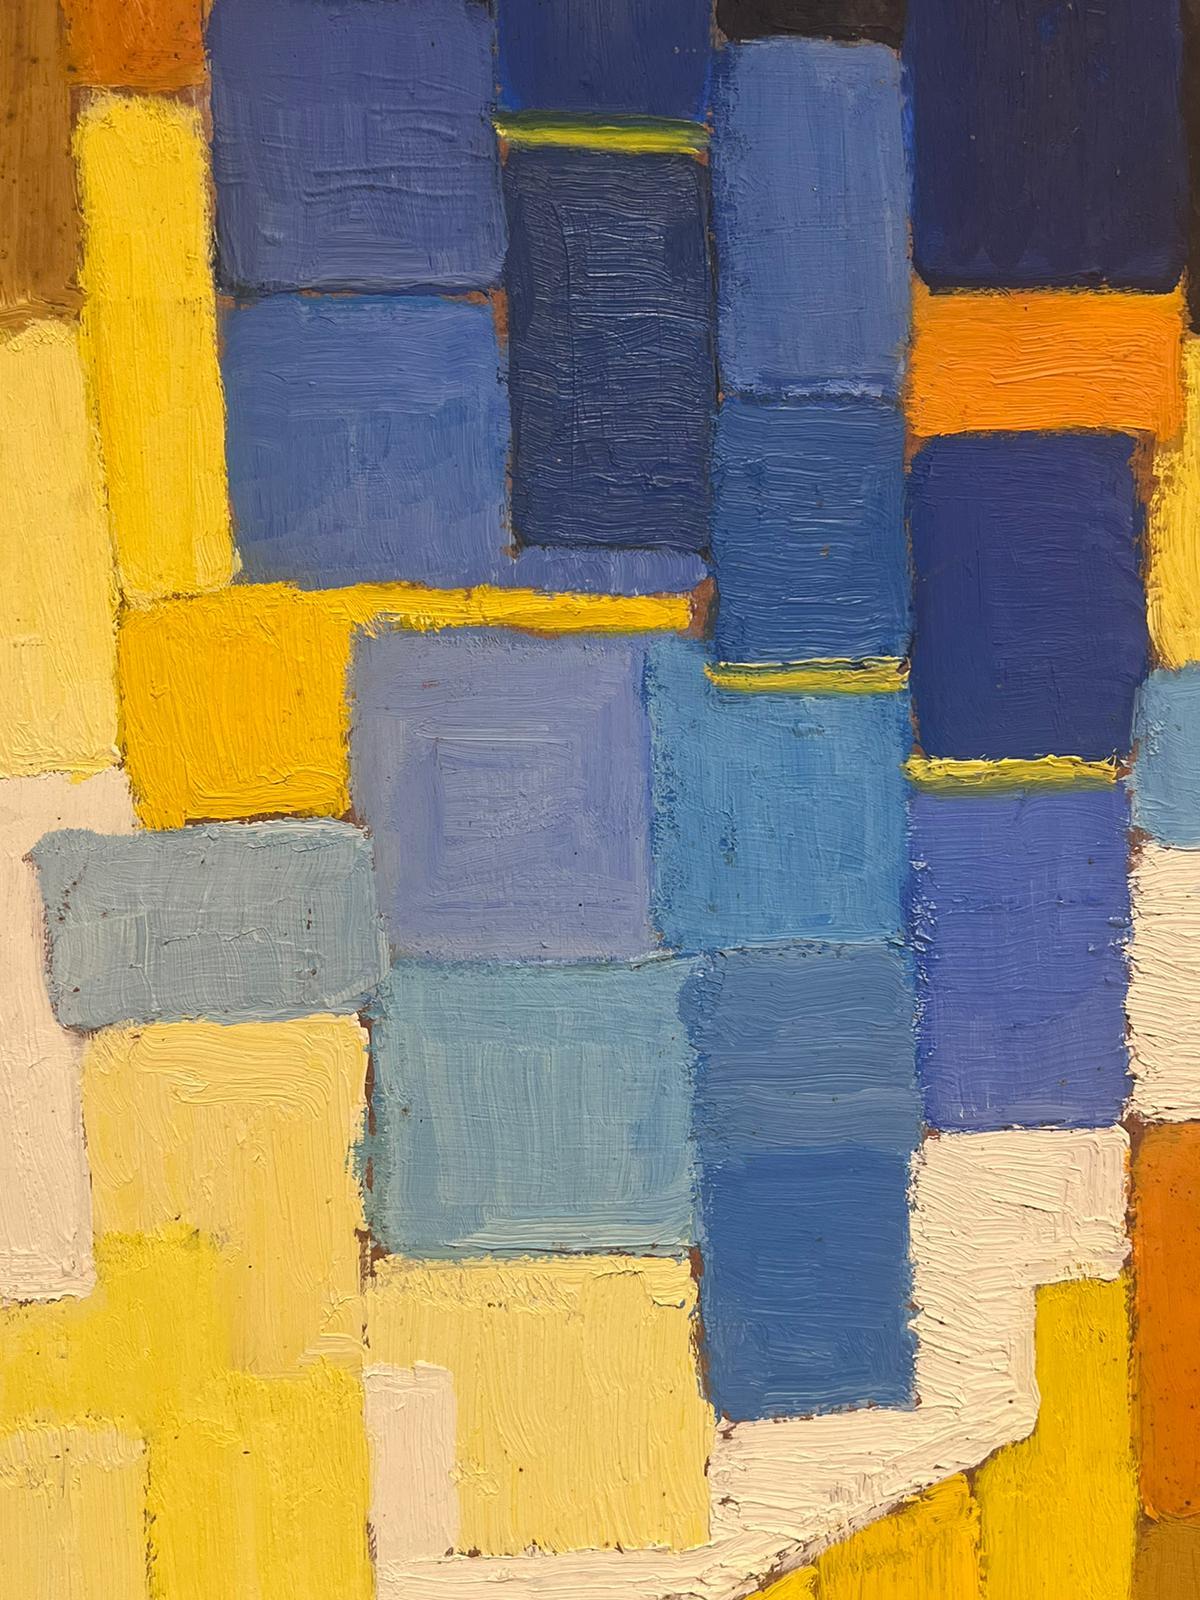 20th Century French Cubist Oil Painting Blues Oranges Yellow & Beige Cubes For Sale 3